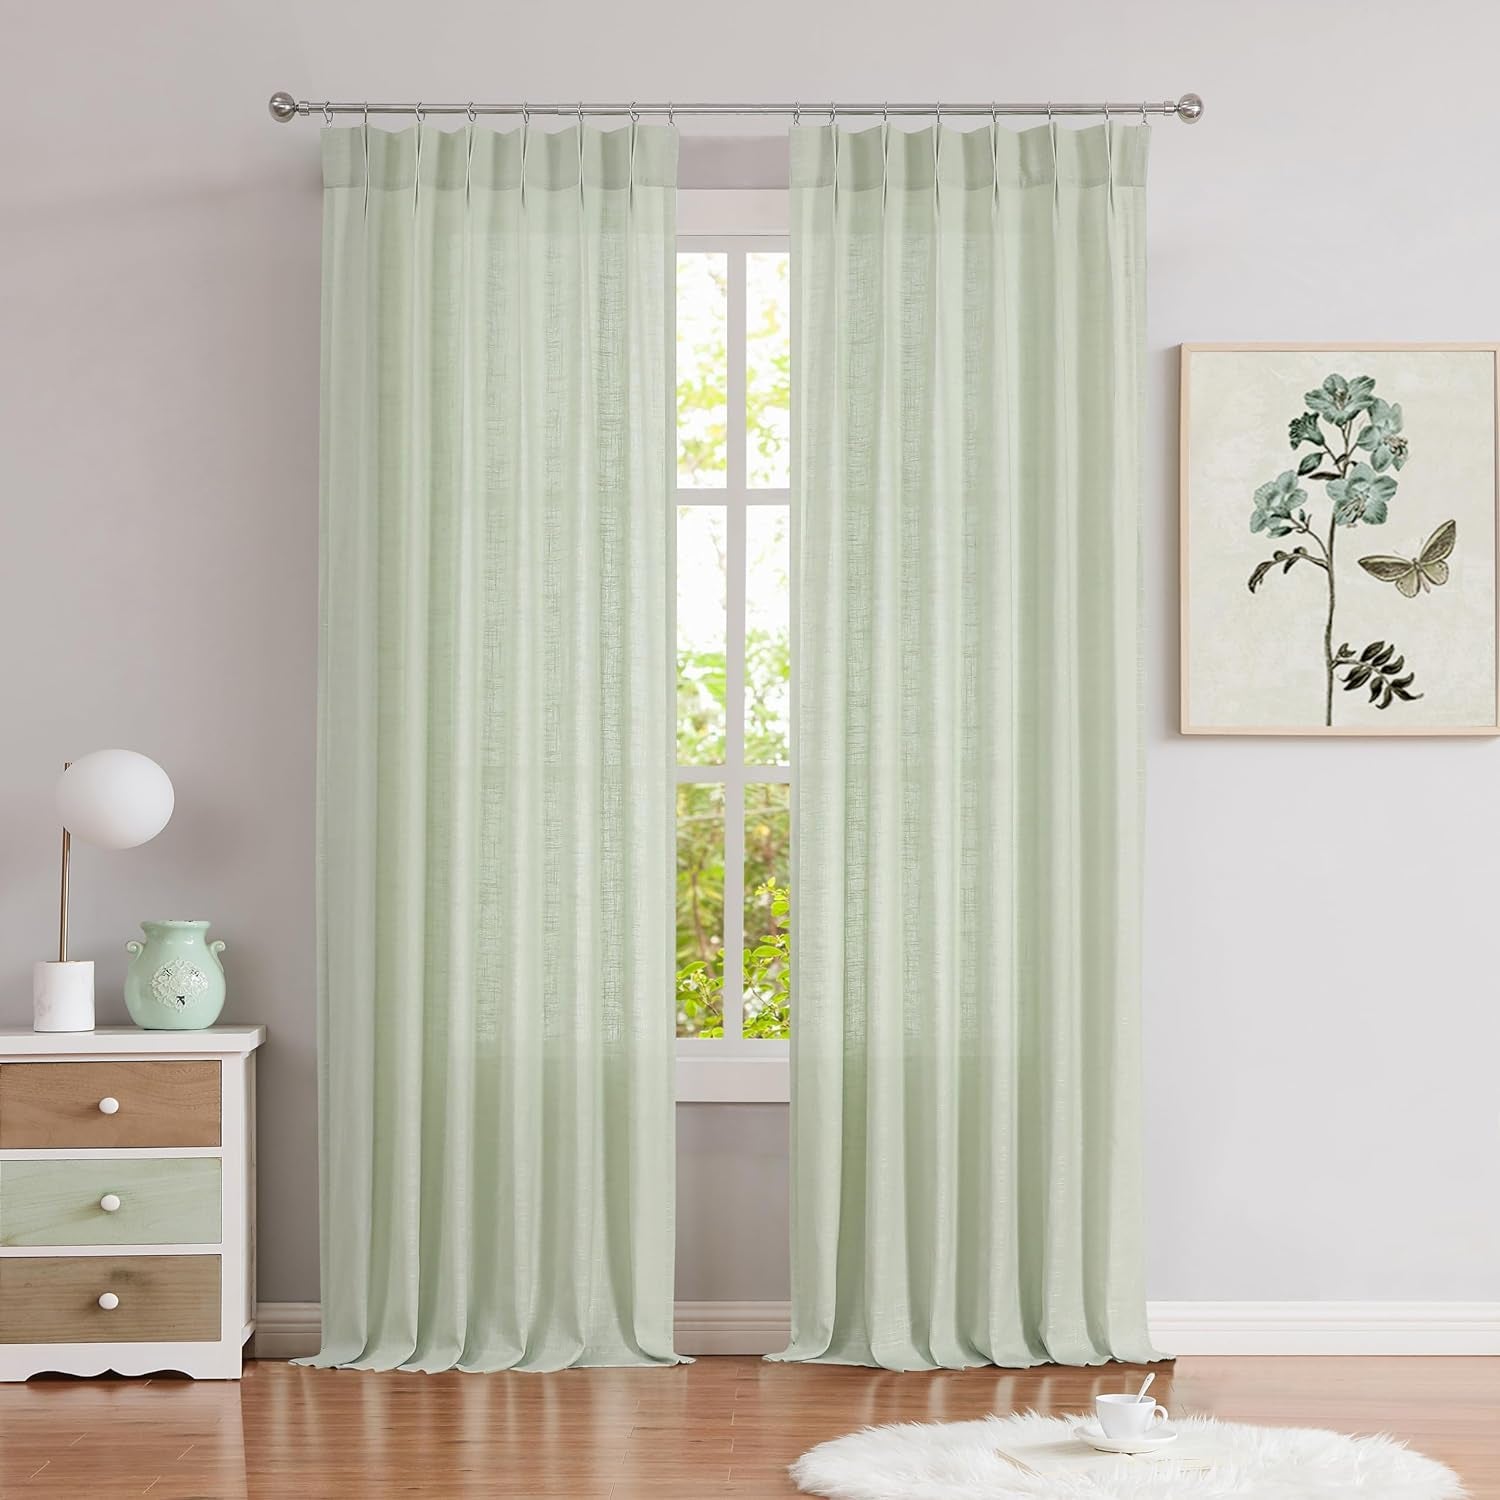 White Pinch Pleated Curtain Semi Sheer Curtain Panel Linen Cotton Blend Decorative Drape 84 Inches Long for Living Room Bedroom Farmhouse Rustic Window Treatment, White, 34"X84"X2  Central Park Light Green 34"X84"X2 